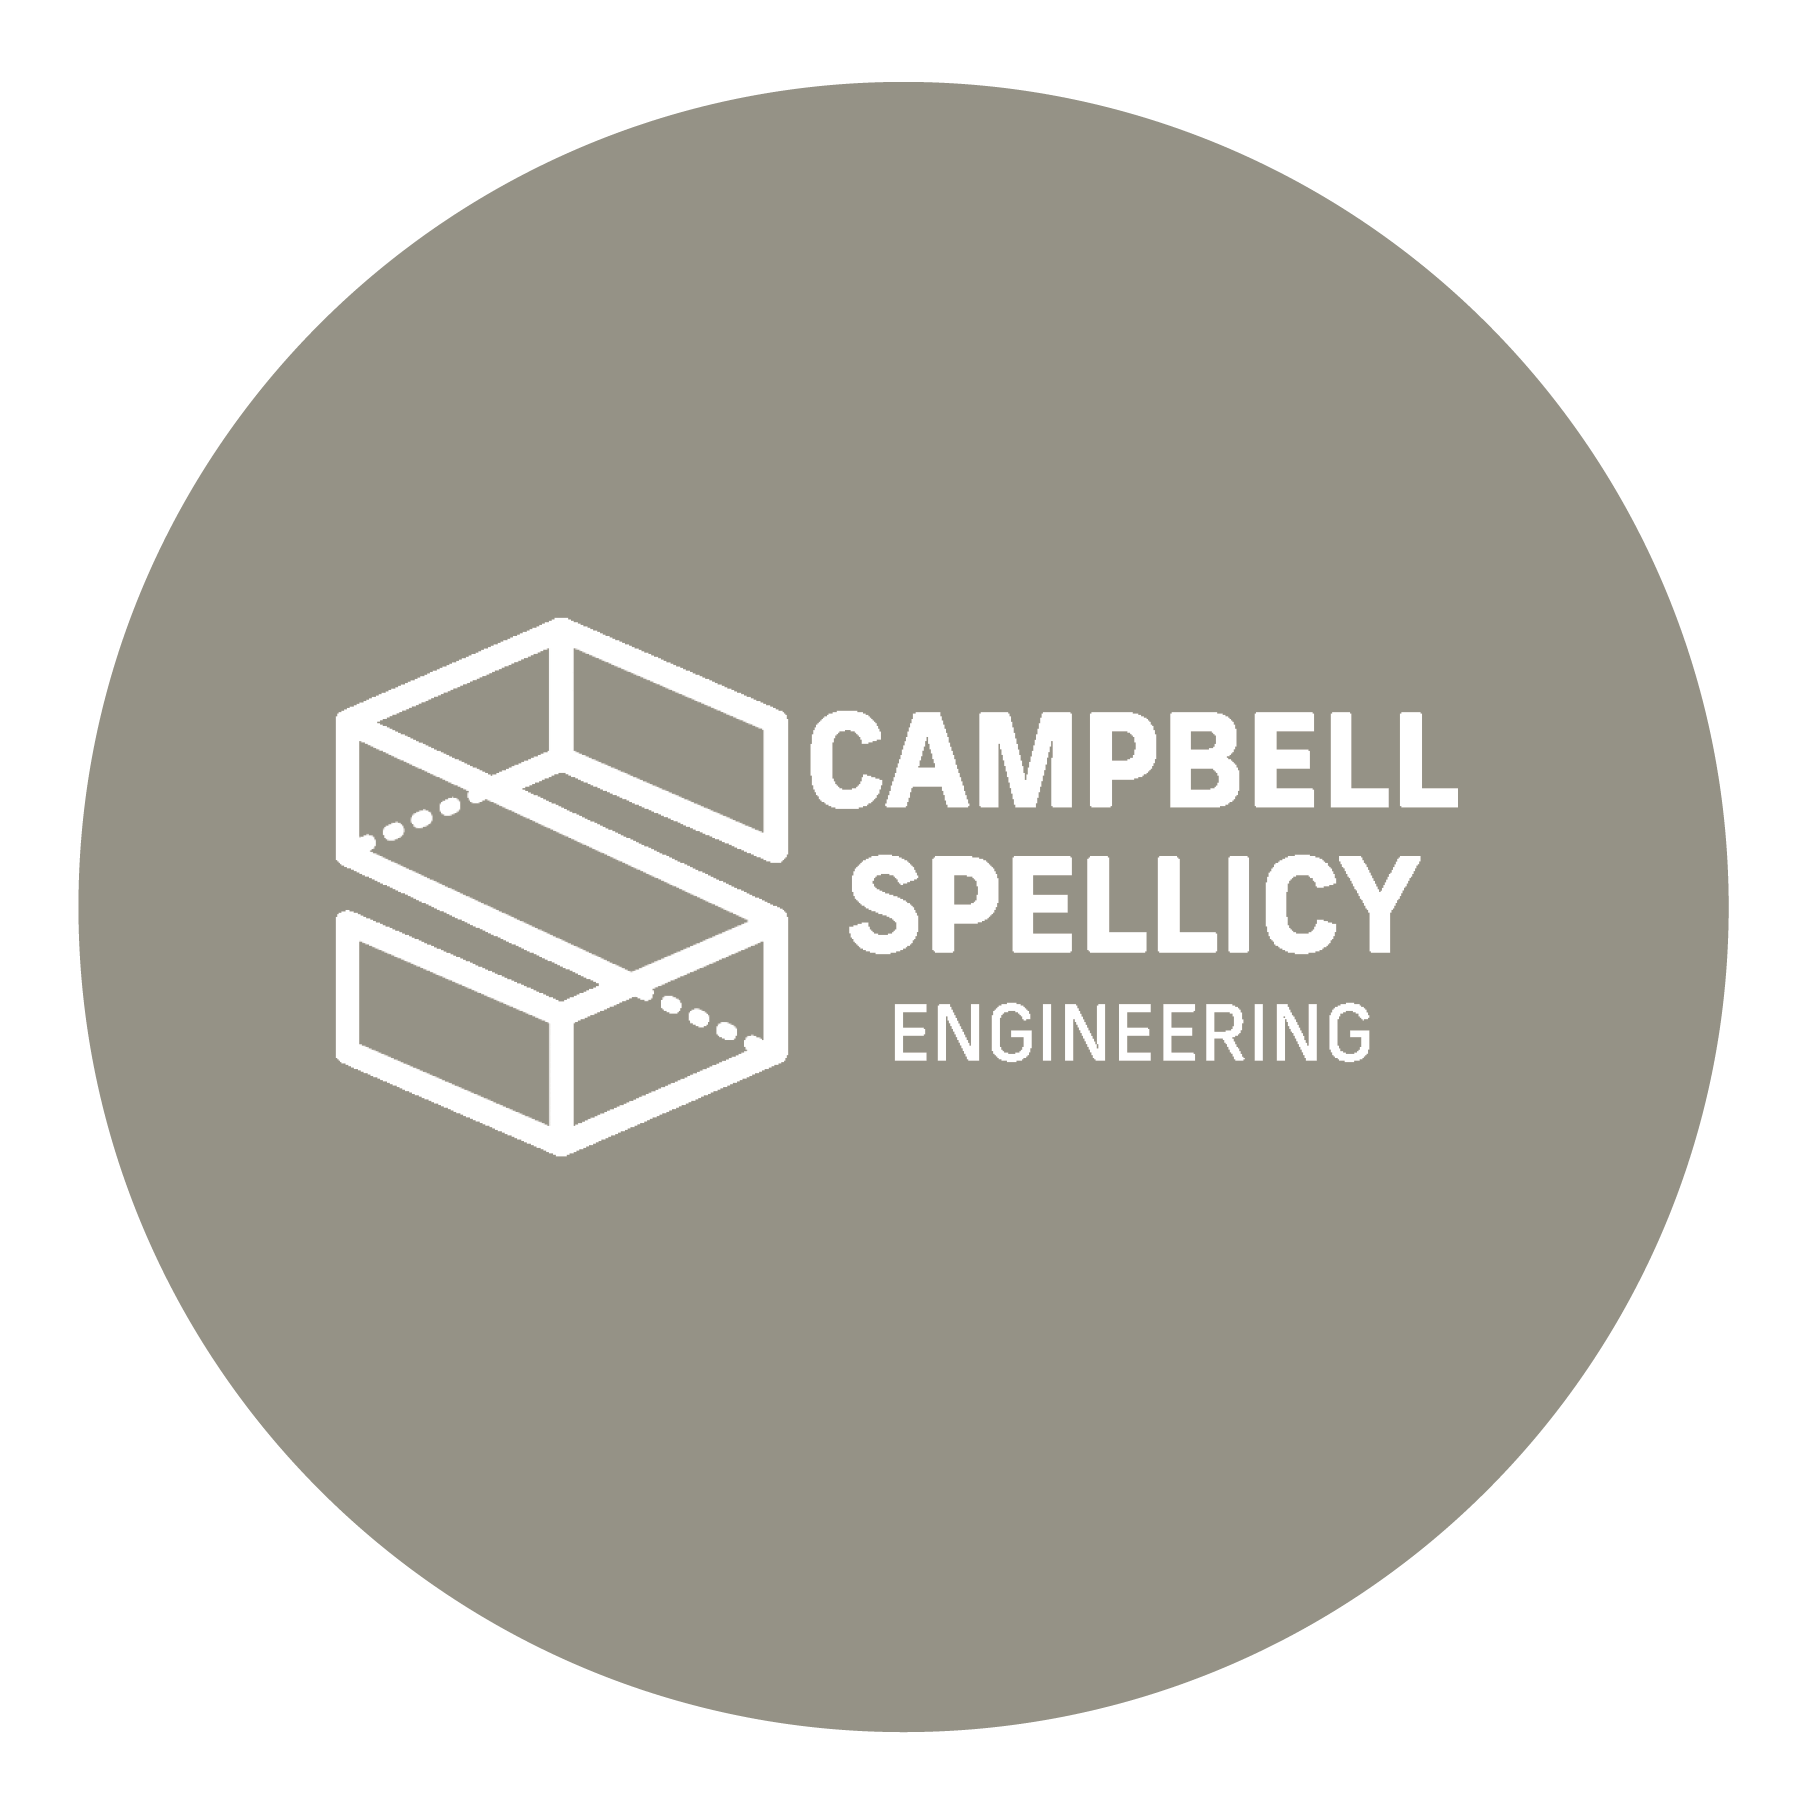 Single Light Gray Circle_Campbell Spellicy Engineering.png